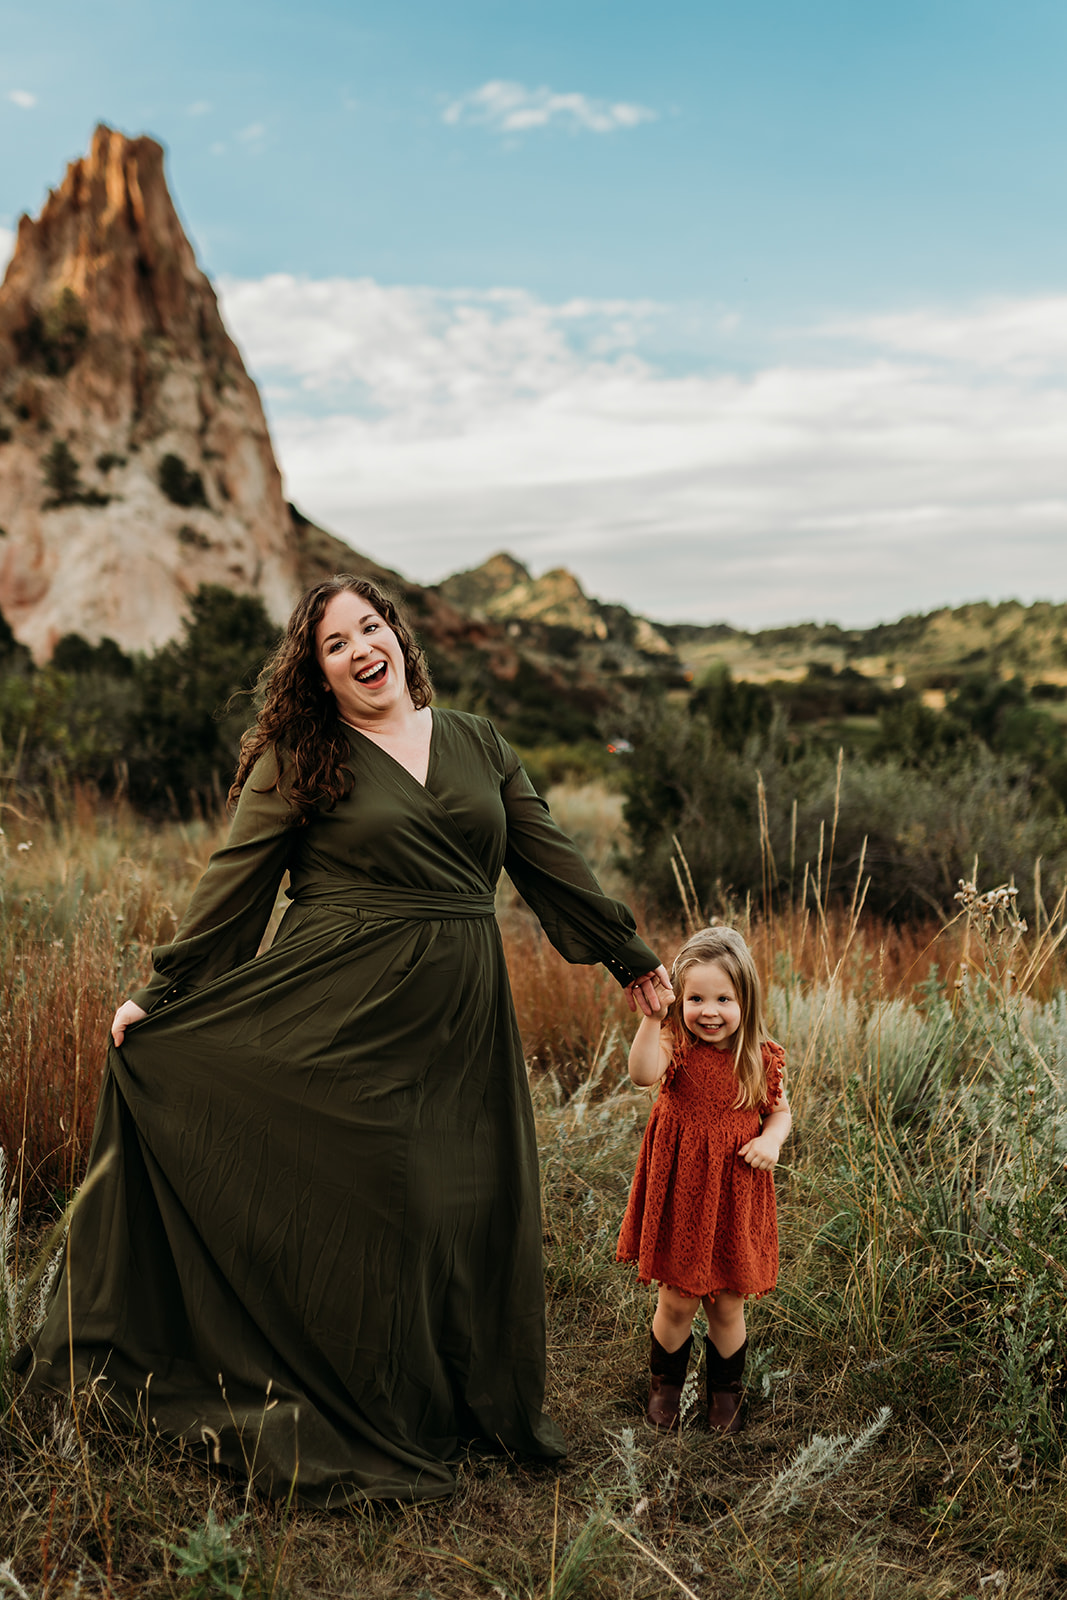 Colorado Springs Photography captures cute mommy and me photo at Garden of the Gods